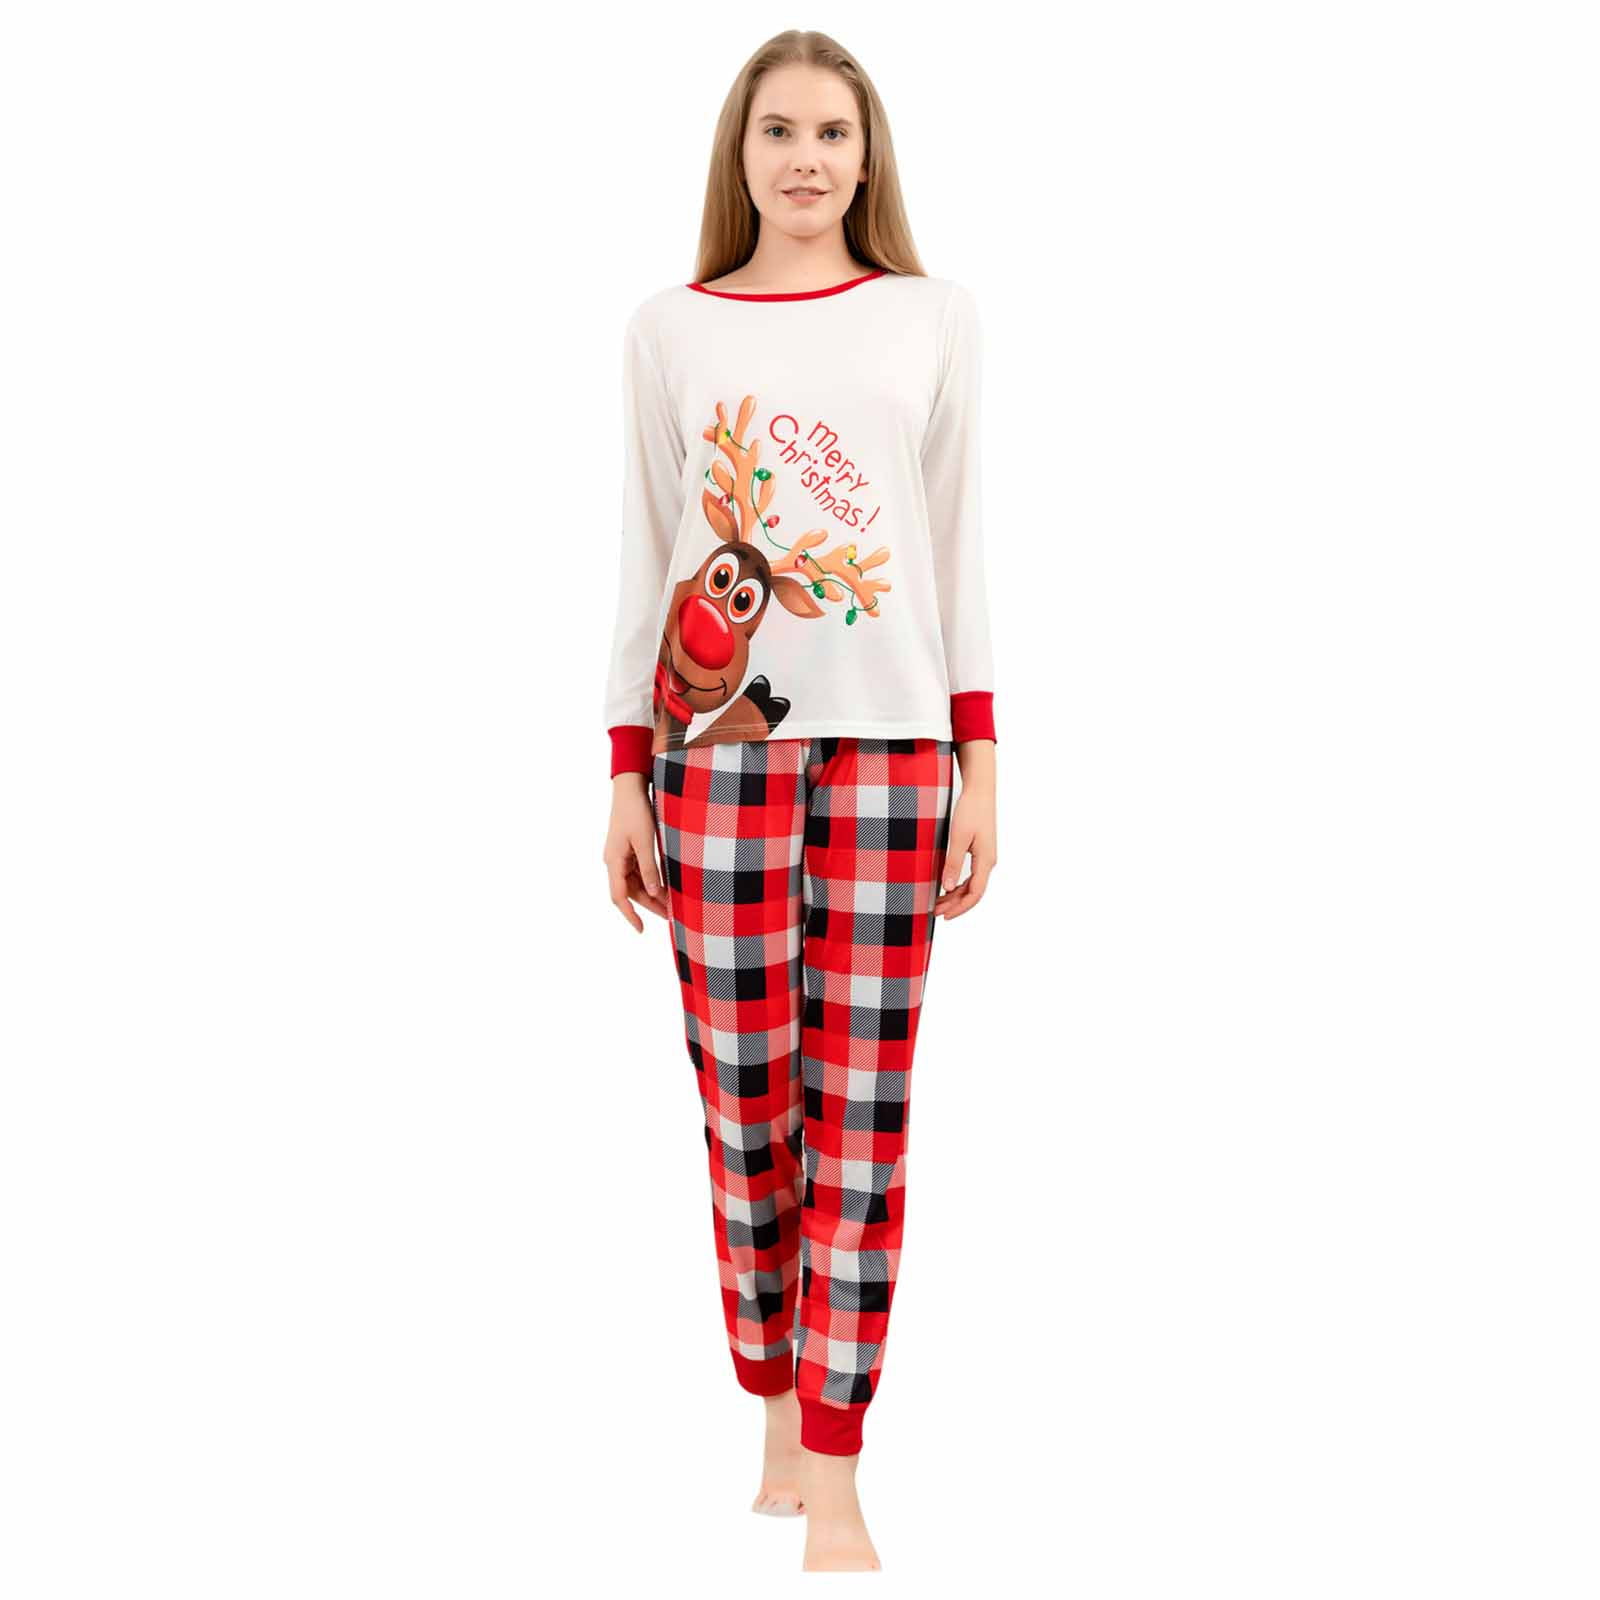  Womens Pajamas Matching Sets Christmas Matching crop top under  10 dollars womens clothes sale prime today clearance skeleton pajama  teacher deals prime cute cheap stuff under 5 dollars customer : Clothing